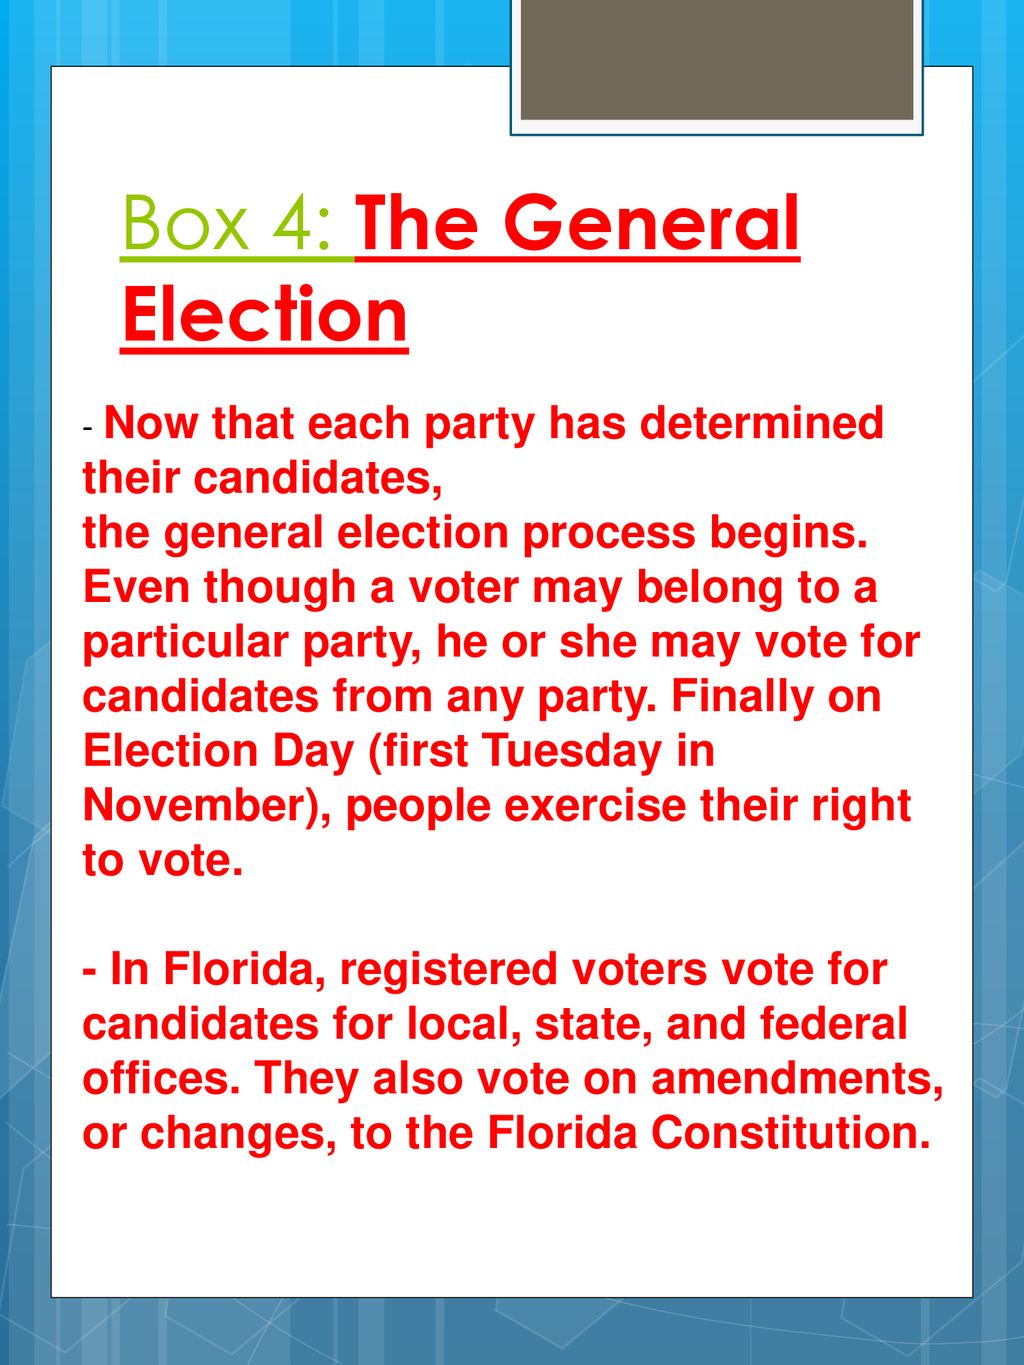 Box 4: The General Election